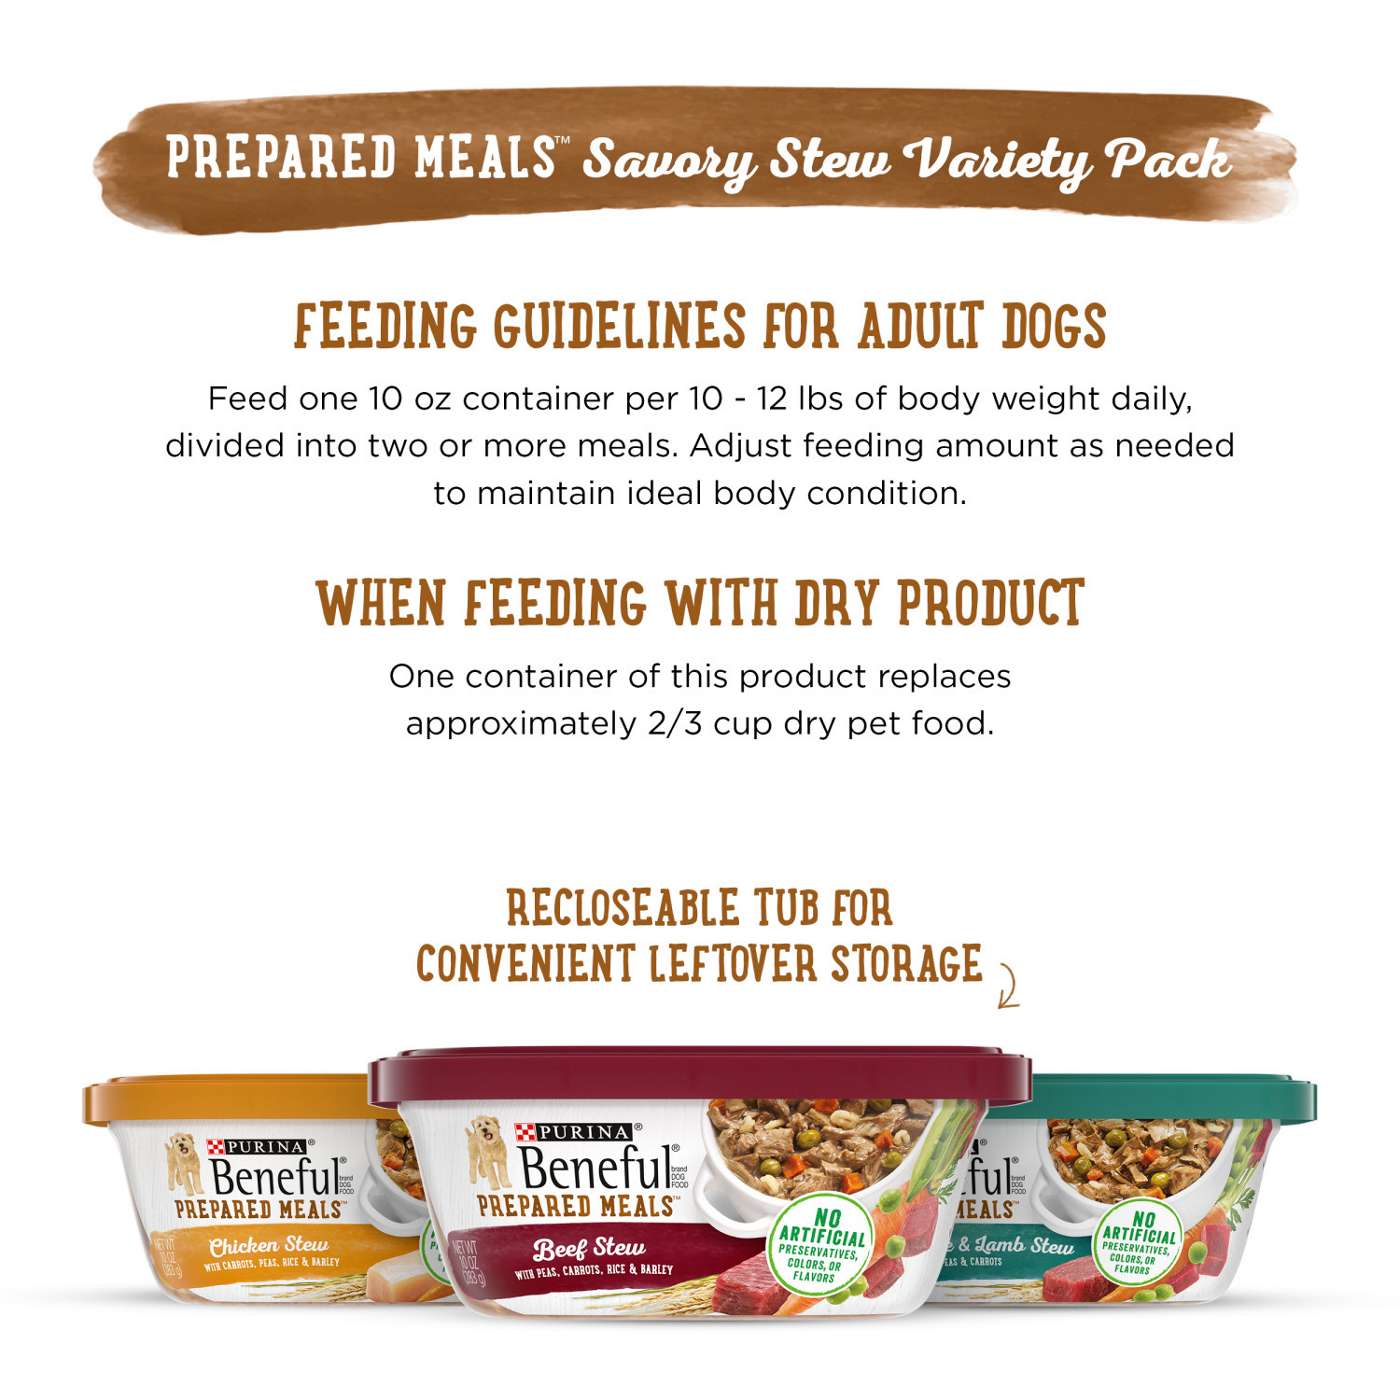 Beneful Purina Beneful High Protein, Gravy Wet Dog Food Variety Pack, Prepared Meals Stew; image 8 of 9